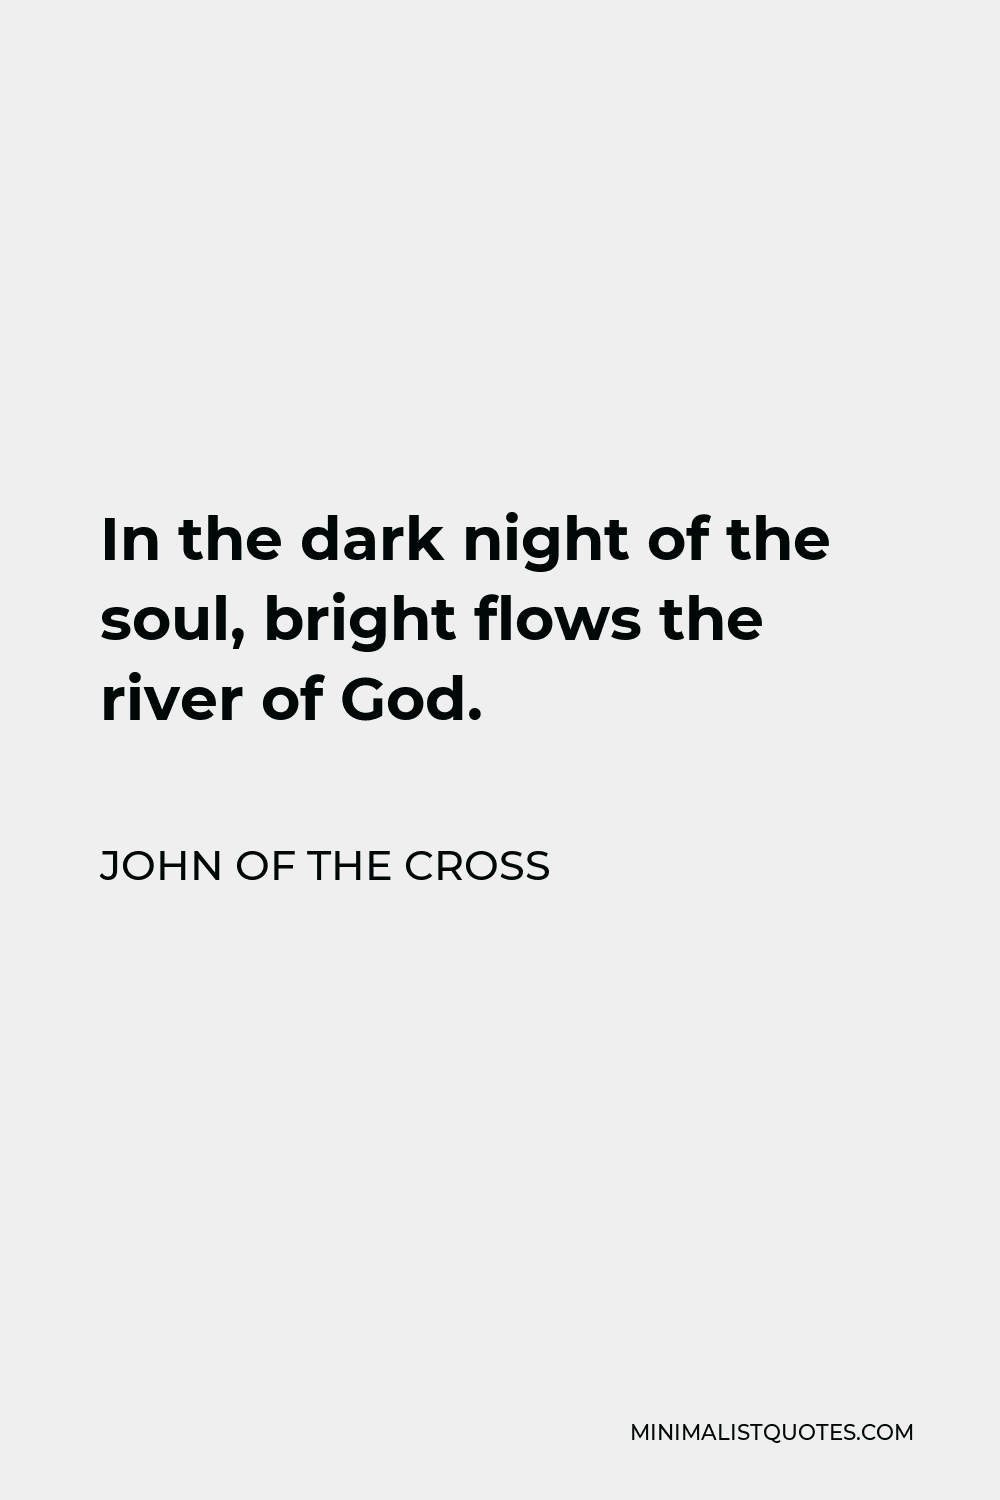 John of the Cross Quote - In the dark night of the soul, bright flows the river of God.